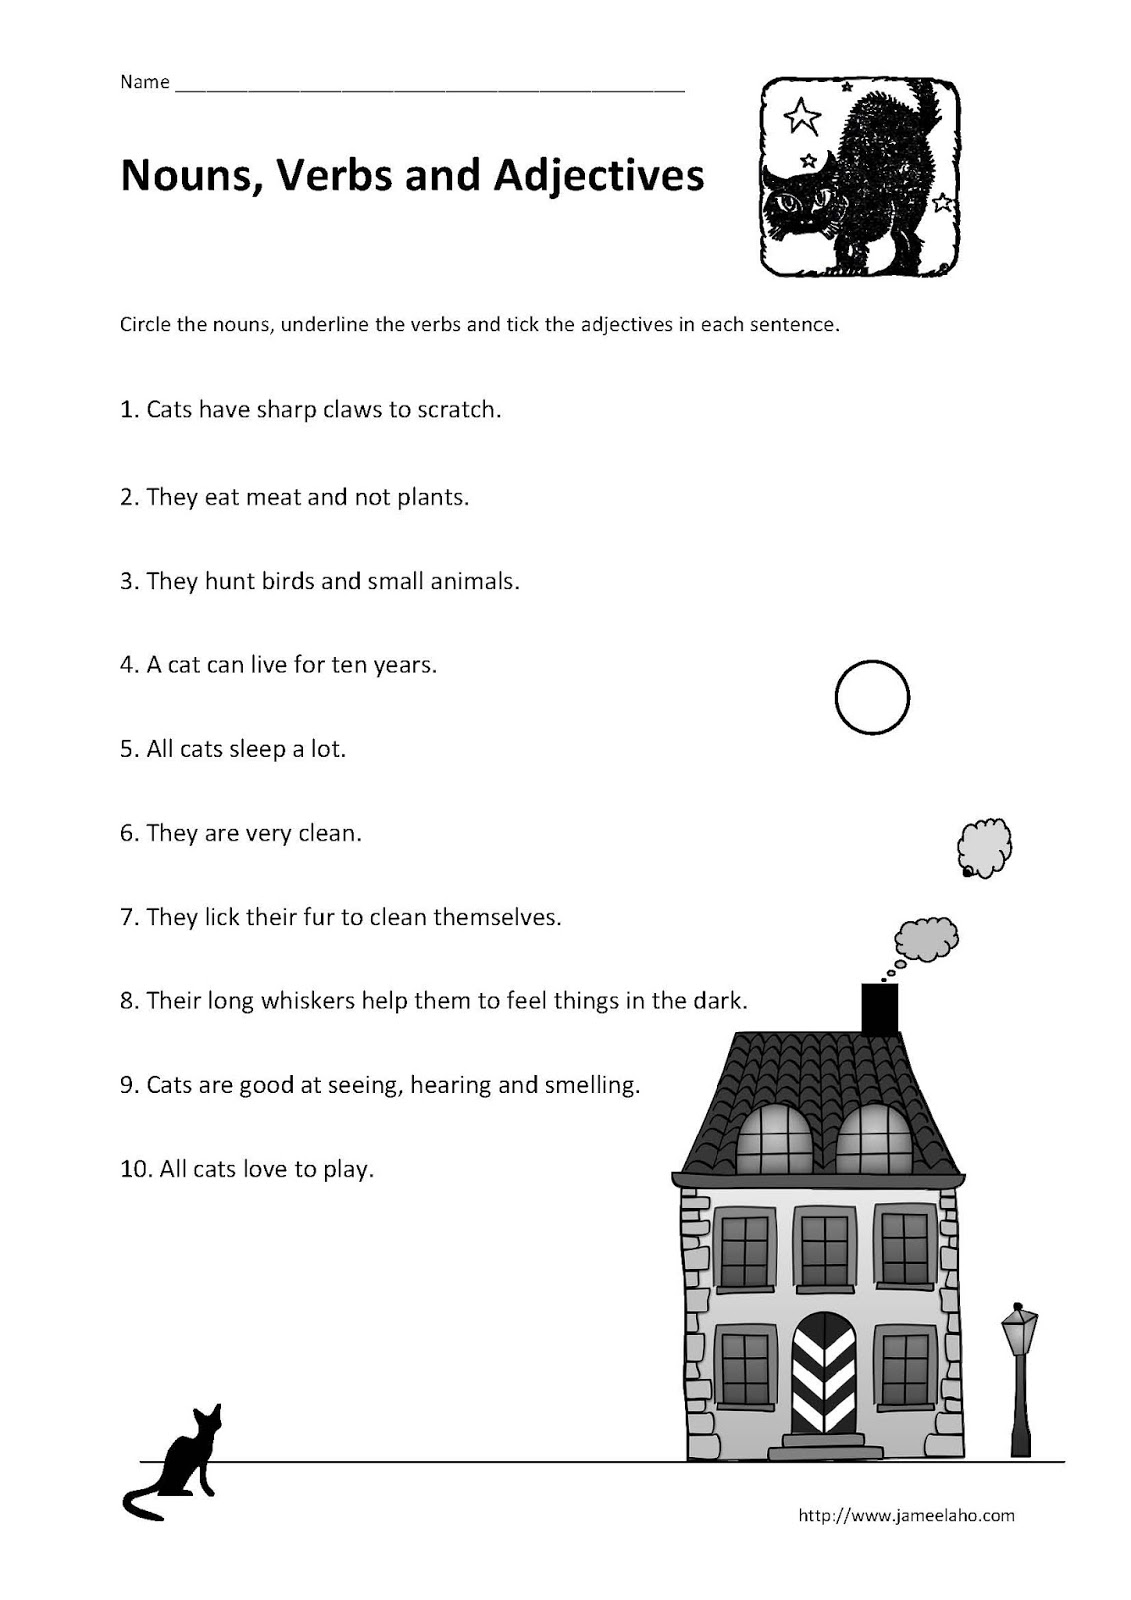 teaching-simplified-identifying-nouns-verbs-and-adjectives-in-a-sentence-worksheet